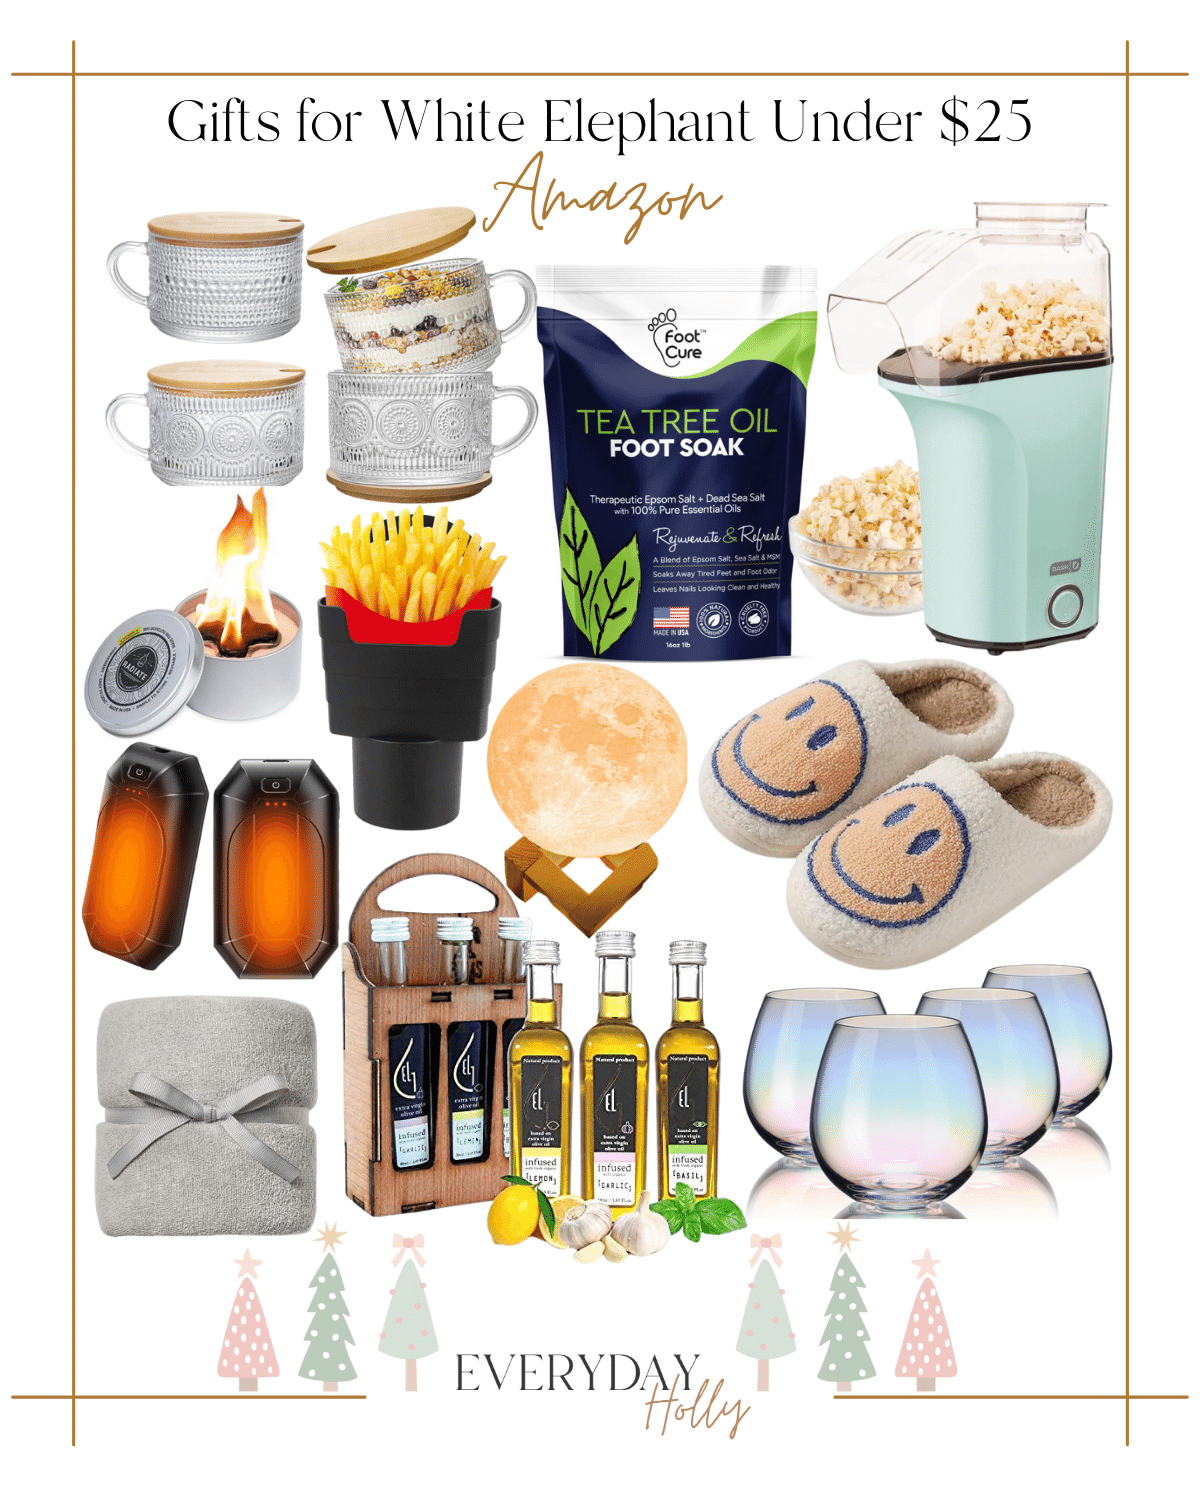 10 Holiday Gift Guides for Everyone This Season | #holiday #giftguide #giftideas #2023 #christmas #gifts #amazon #whiteelephant #giftsunder$25 #glass #teatree #popcornmaker #portablecampfire #fryholder #moonlamp #slippers #handwarmer #oliveoil #microfiber #wineglass